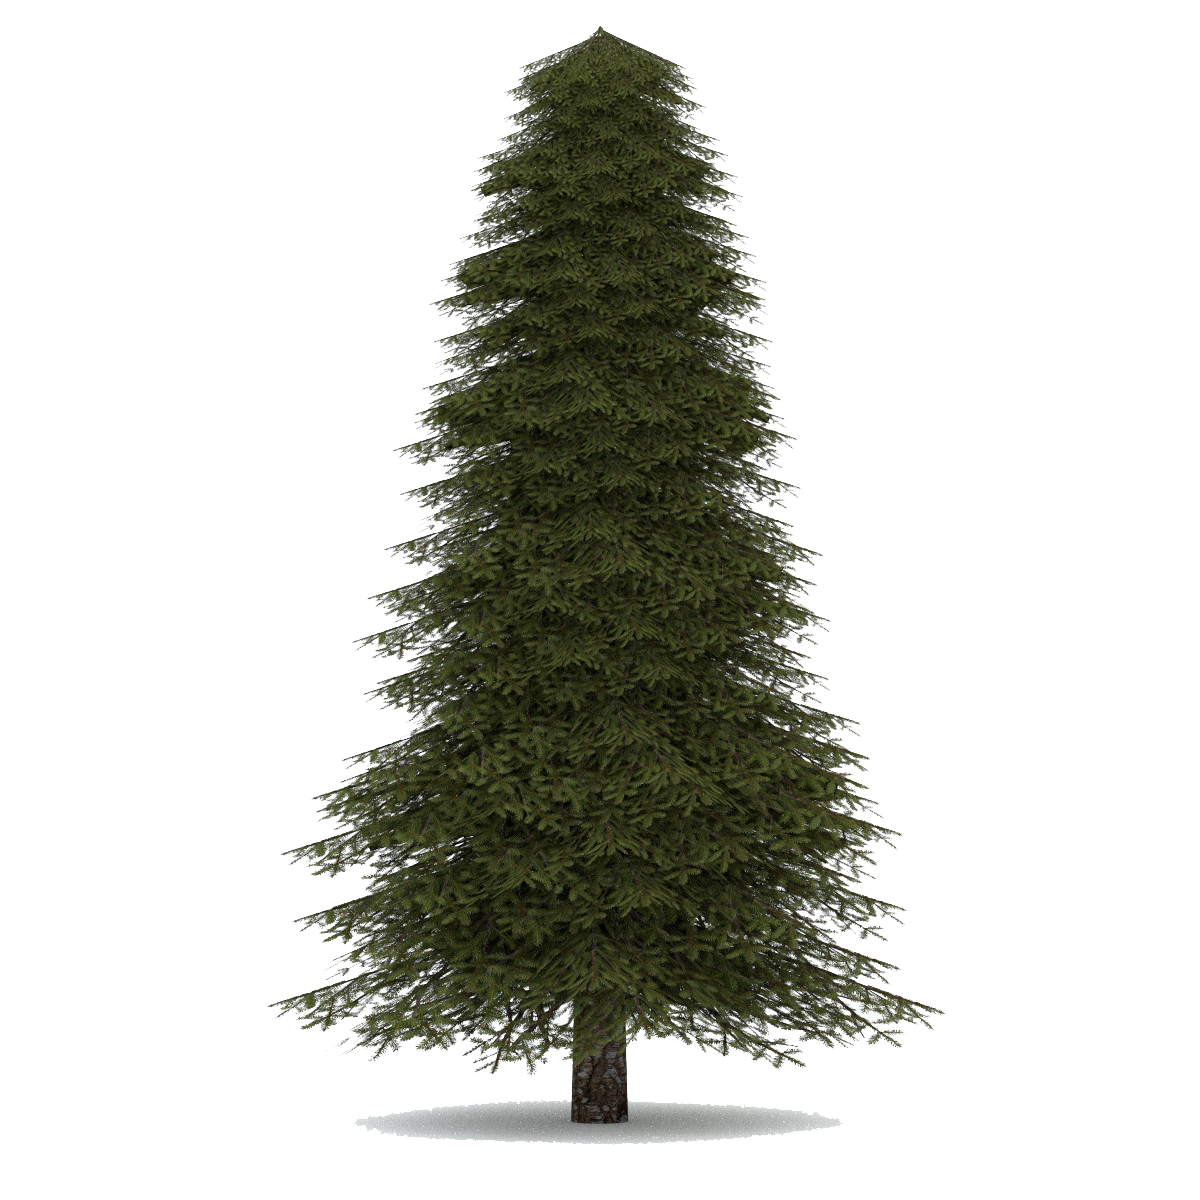 Firtree HD PNG - 91581